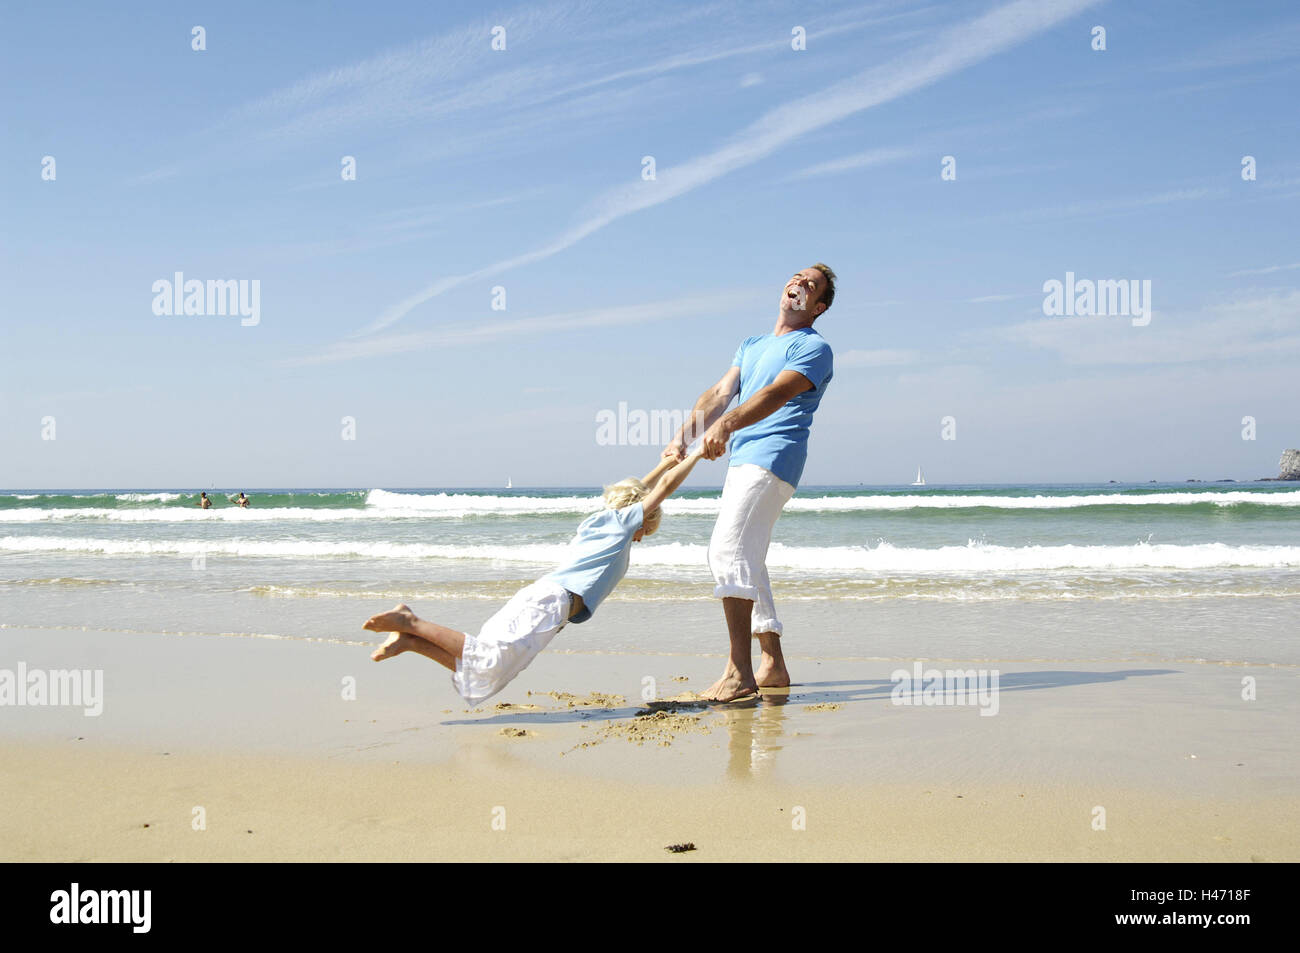 Beach, father, son, happy, game, rotate, motion, person, man, parent, child, boy, together, fun, joy, leisurewear, sunny, summer, outside, vacation, family vacation, barefoot, exuberance, cheerfulness, whole body, two, sandy beach, sea, laugh, Stock Photo